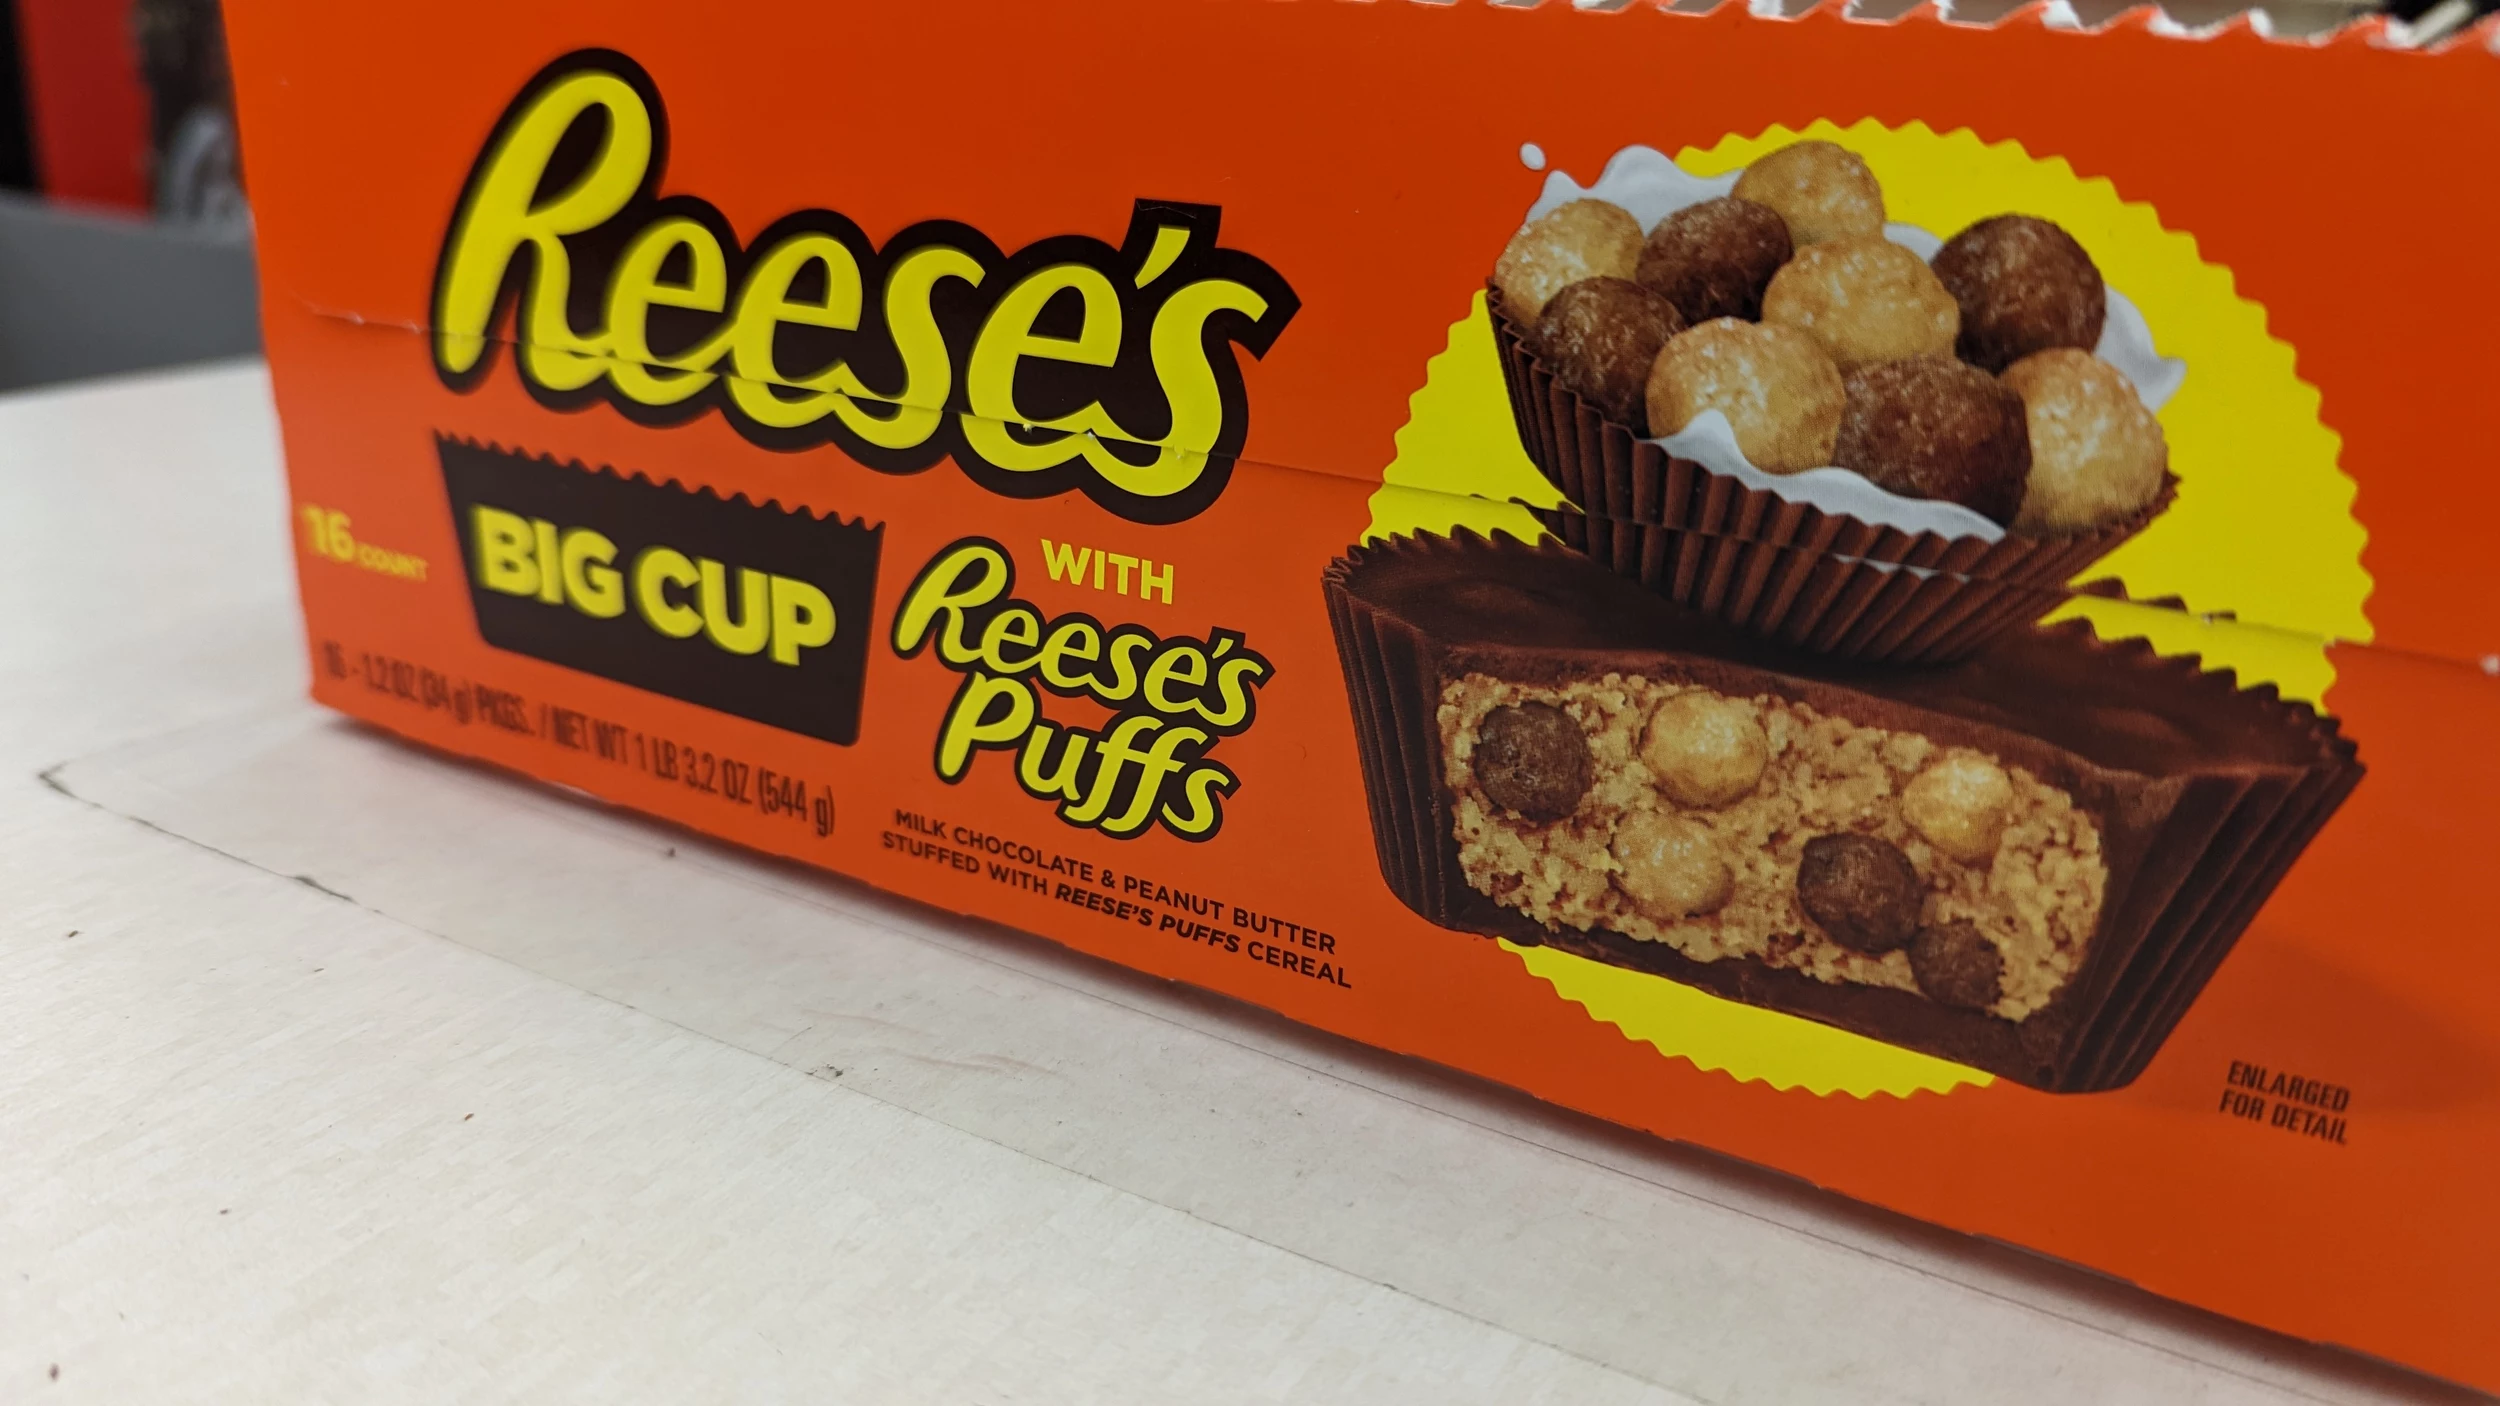 Whoevers Brilliant Idea it Was to Put Reeses Puffs in a Peanut Butter Cup, Thank picture pic image